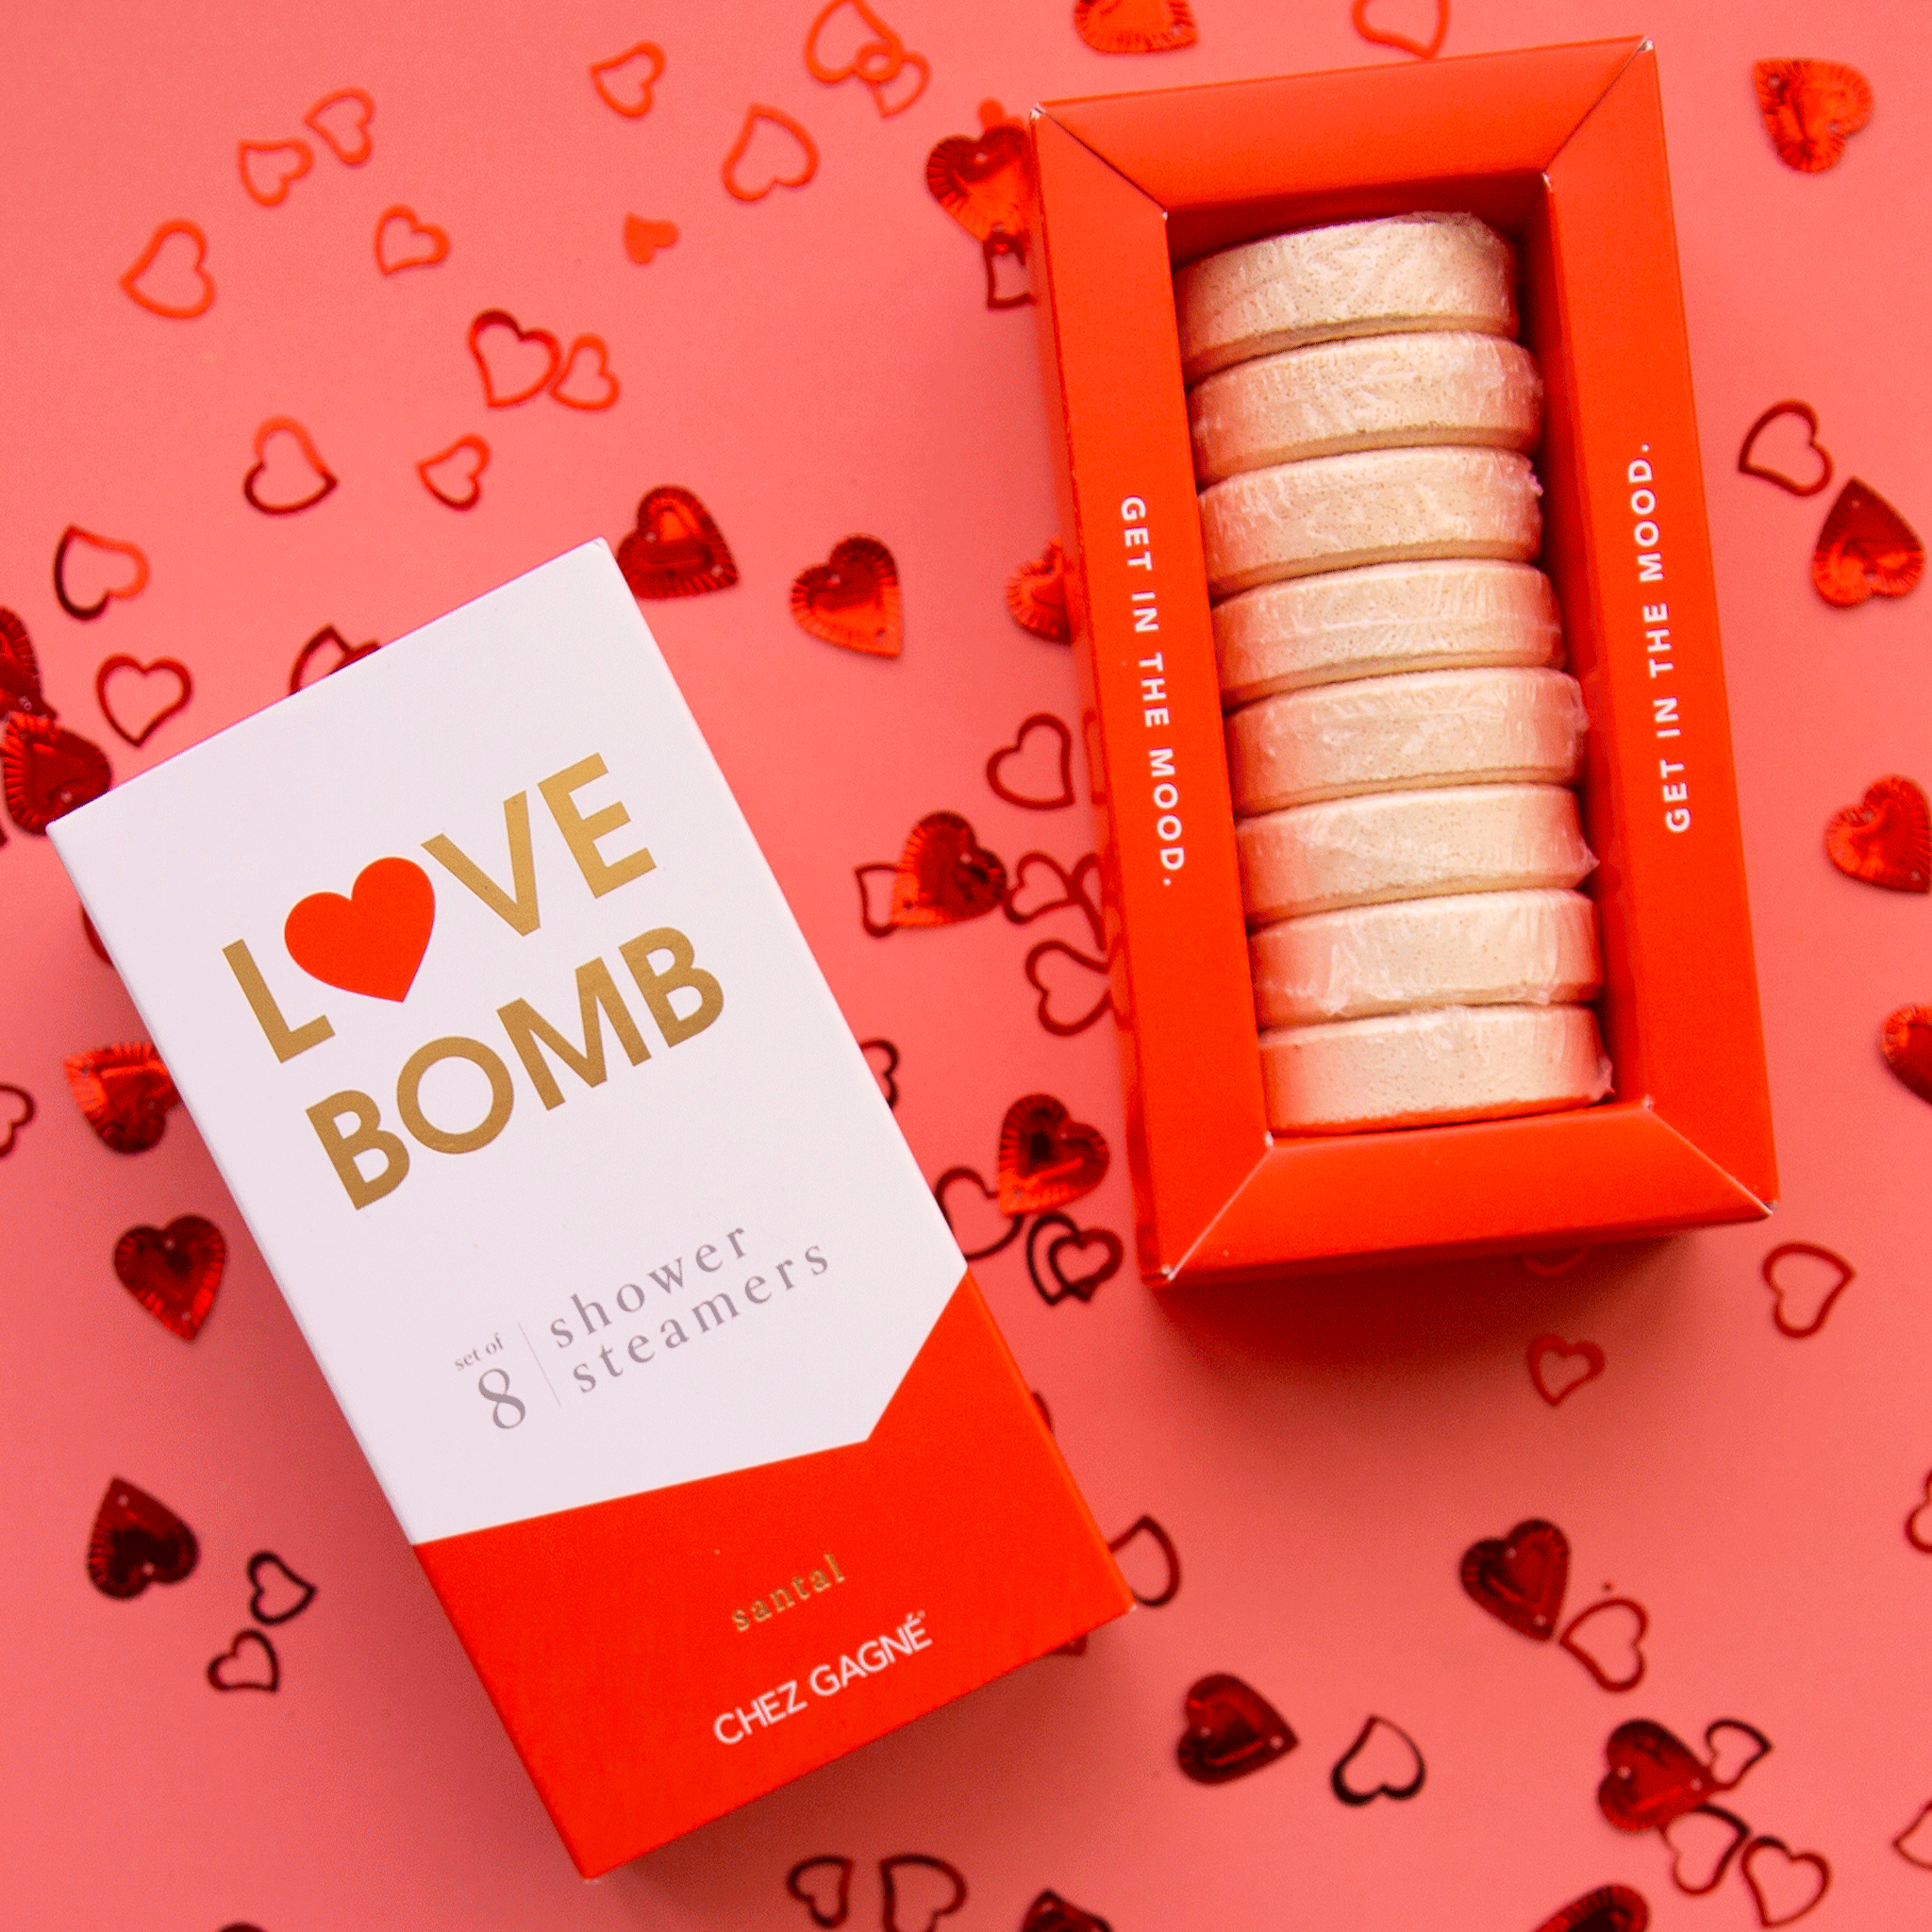 On a red background is a white and red box of shower steaming tablets with text at the top that reads, &quot;Love Bomb 8 Shower Steamers&quot;.